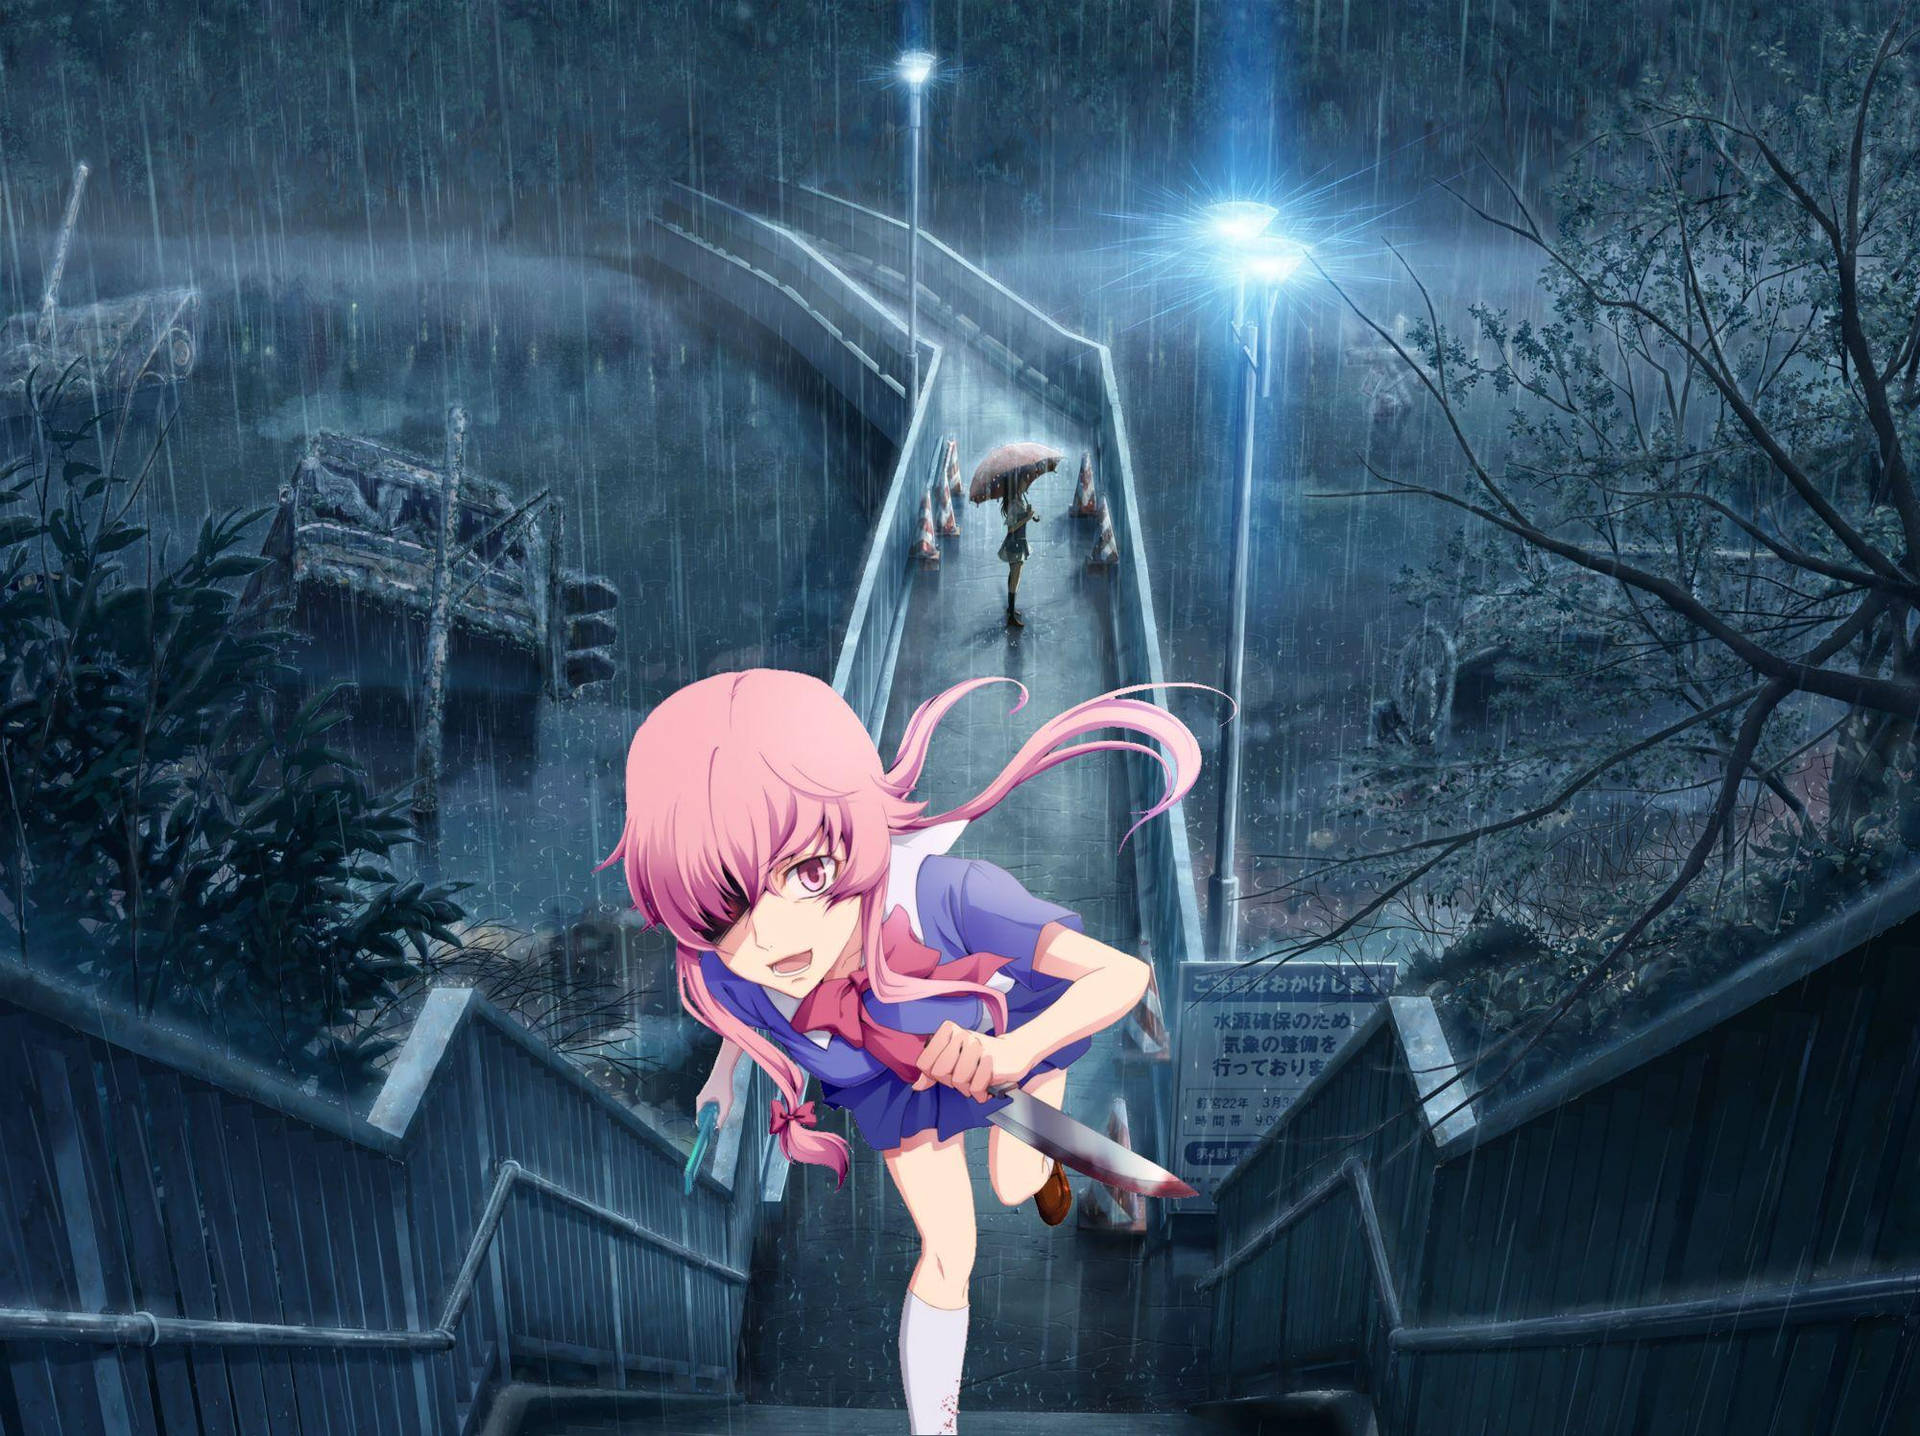 Caption: Yuno Gasai From Future Diary - Intensity Captured In One Image Background